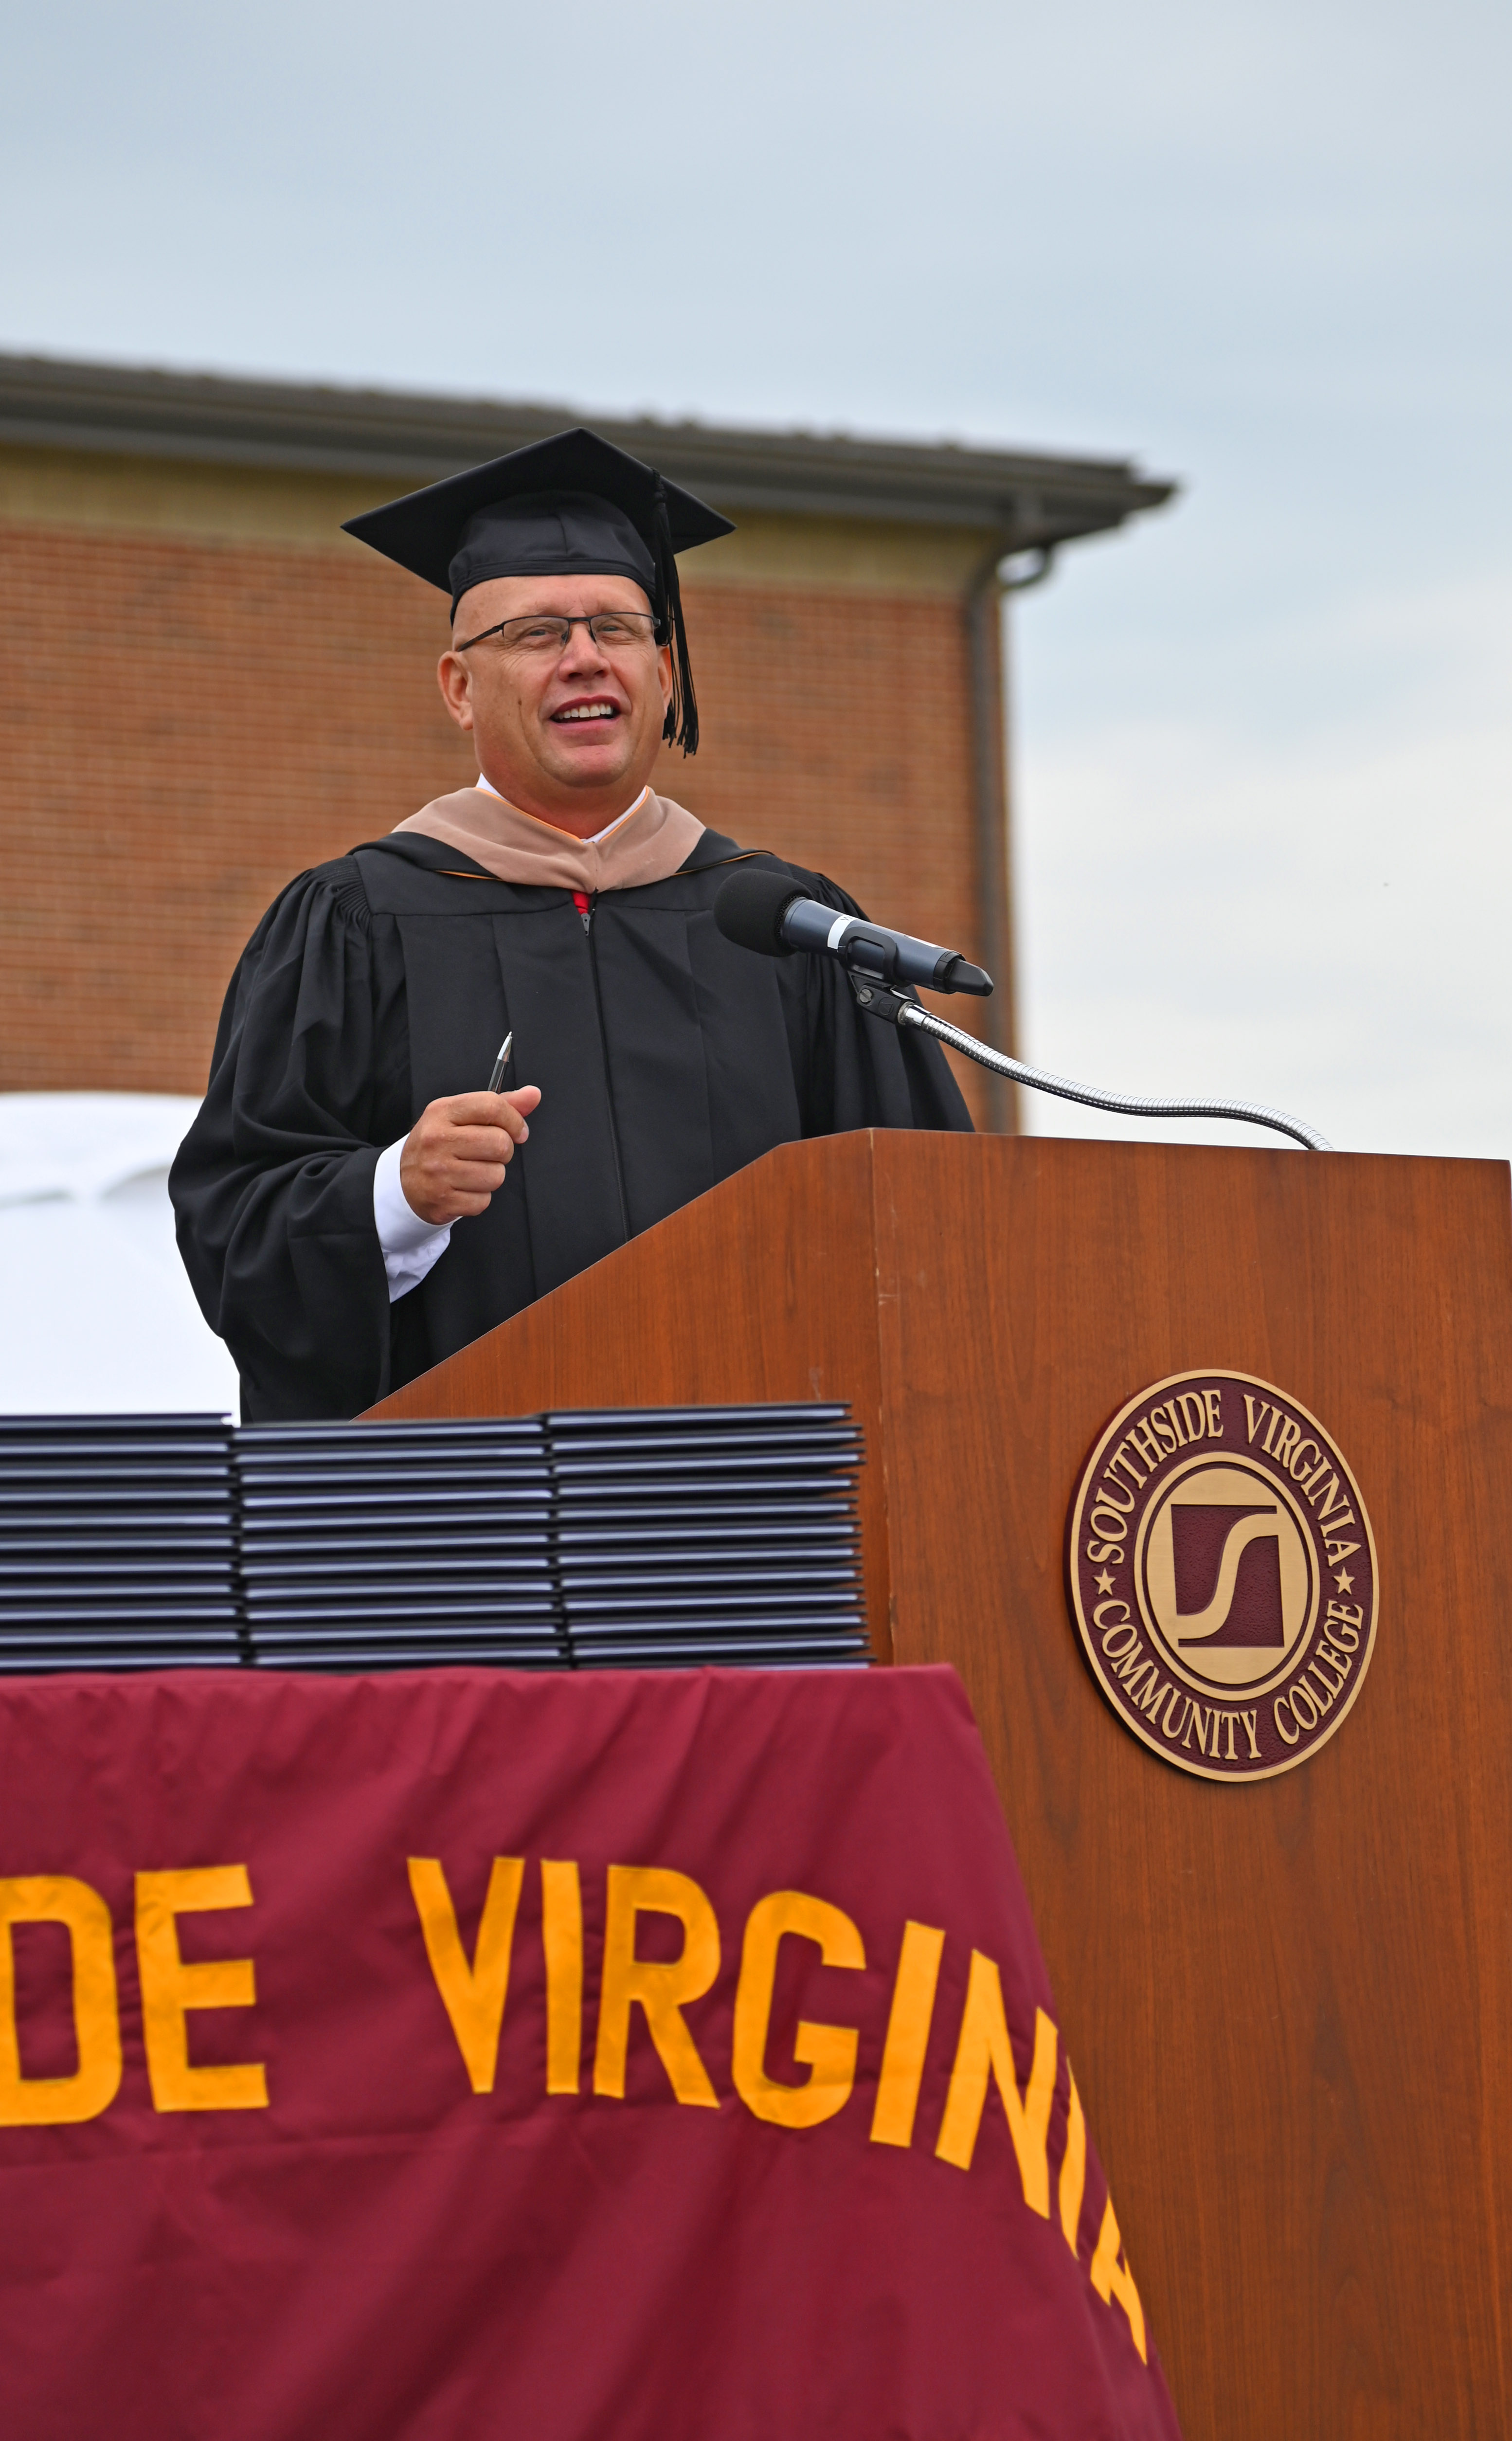 Troy Selberg Gives Commencement Speech